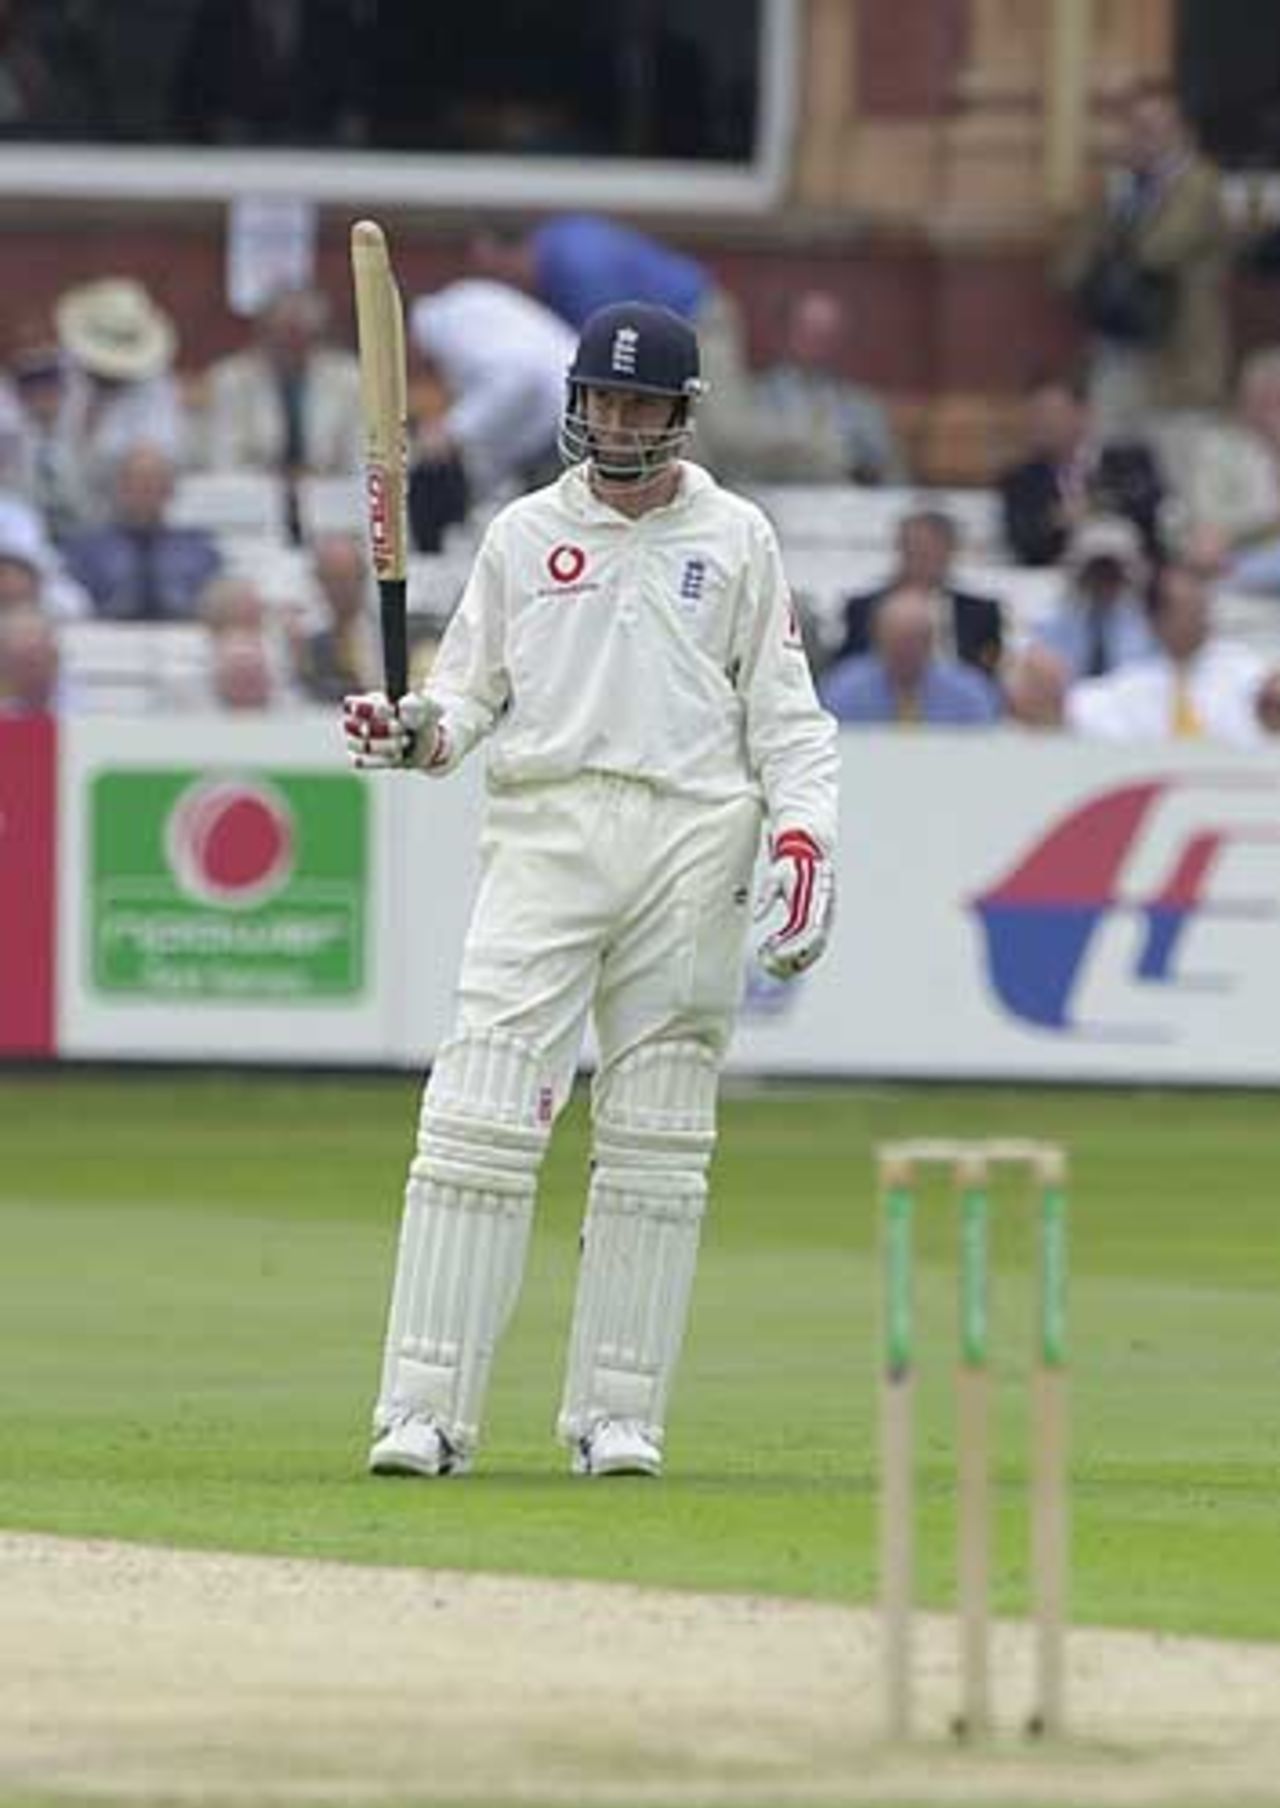 Crawley celebrates his 50 runs for England at the Lords ground , England v India, 1st npower Test at Lord's